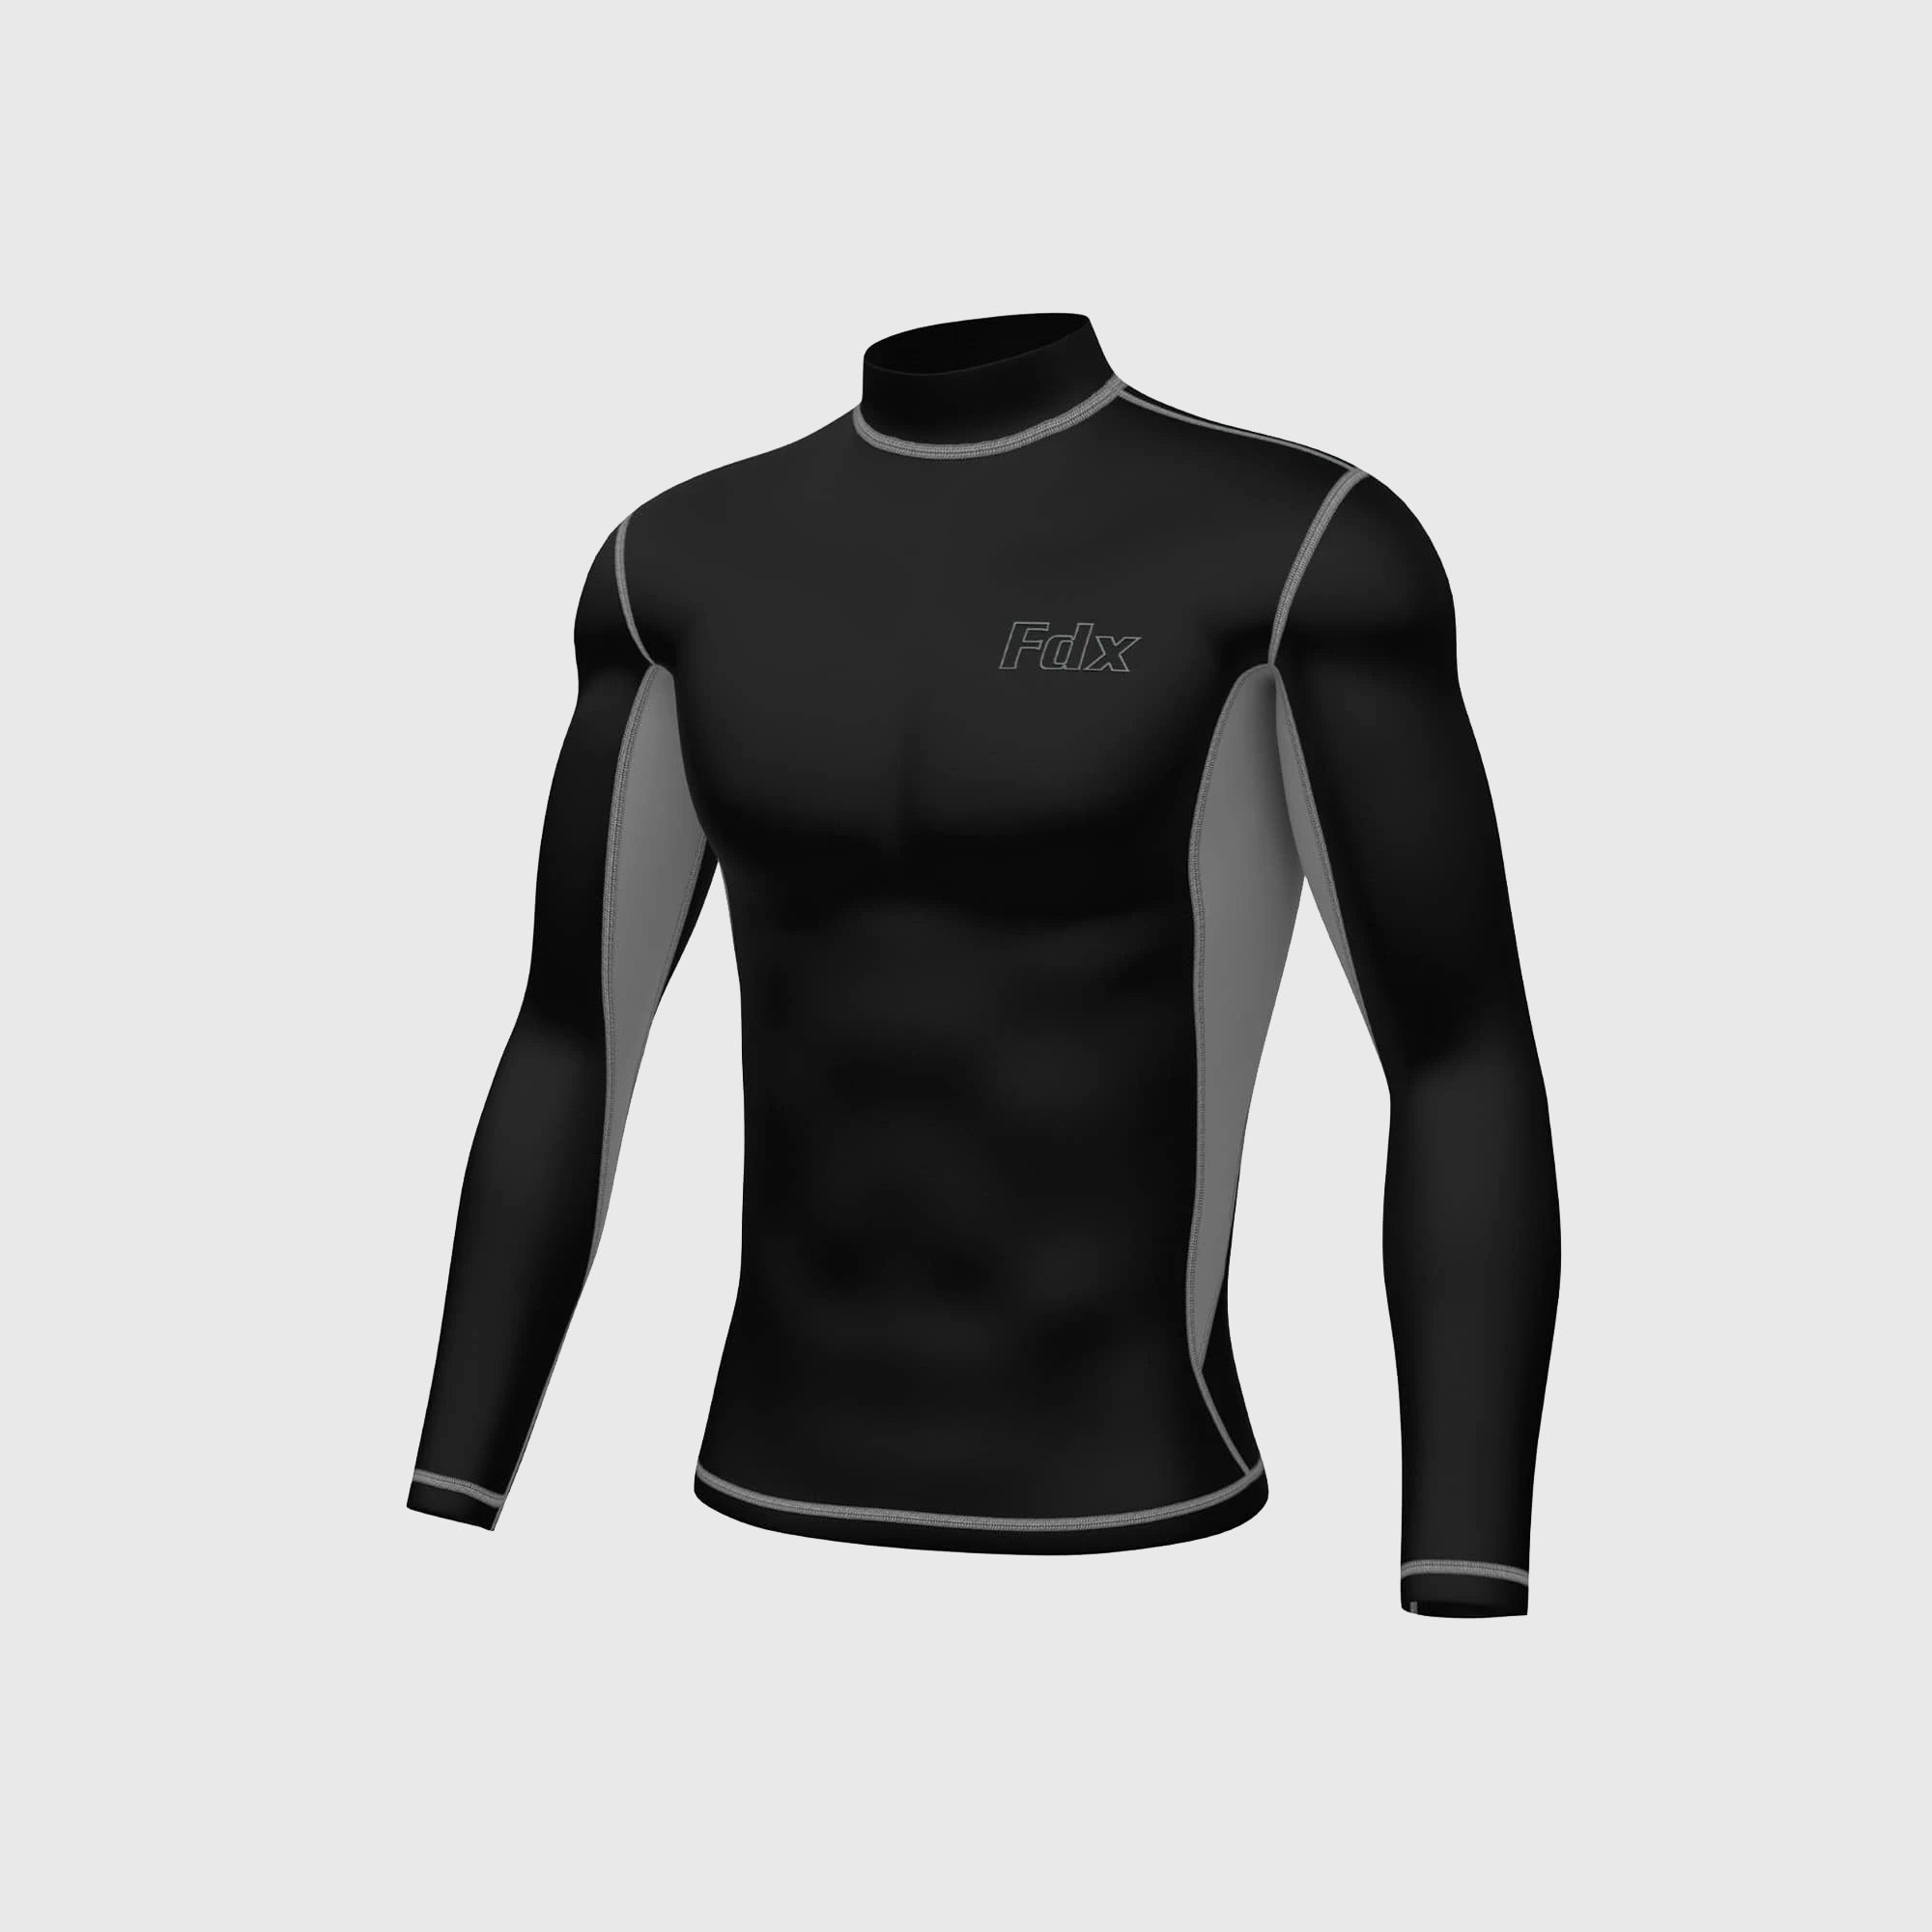 Fdx Mens Black & Grey Long Sleeve Compression Top Running Gym Workout Wear Rash Guard Stretchable Breathable - Inorex